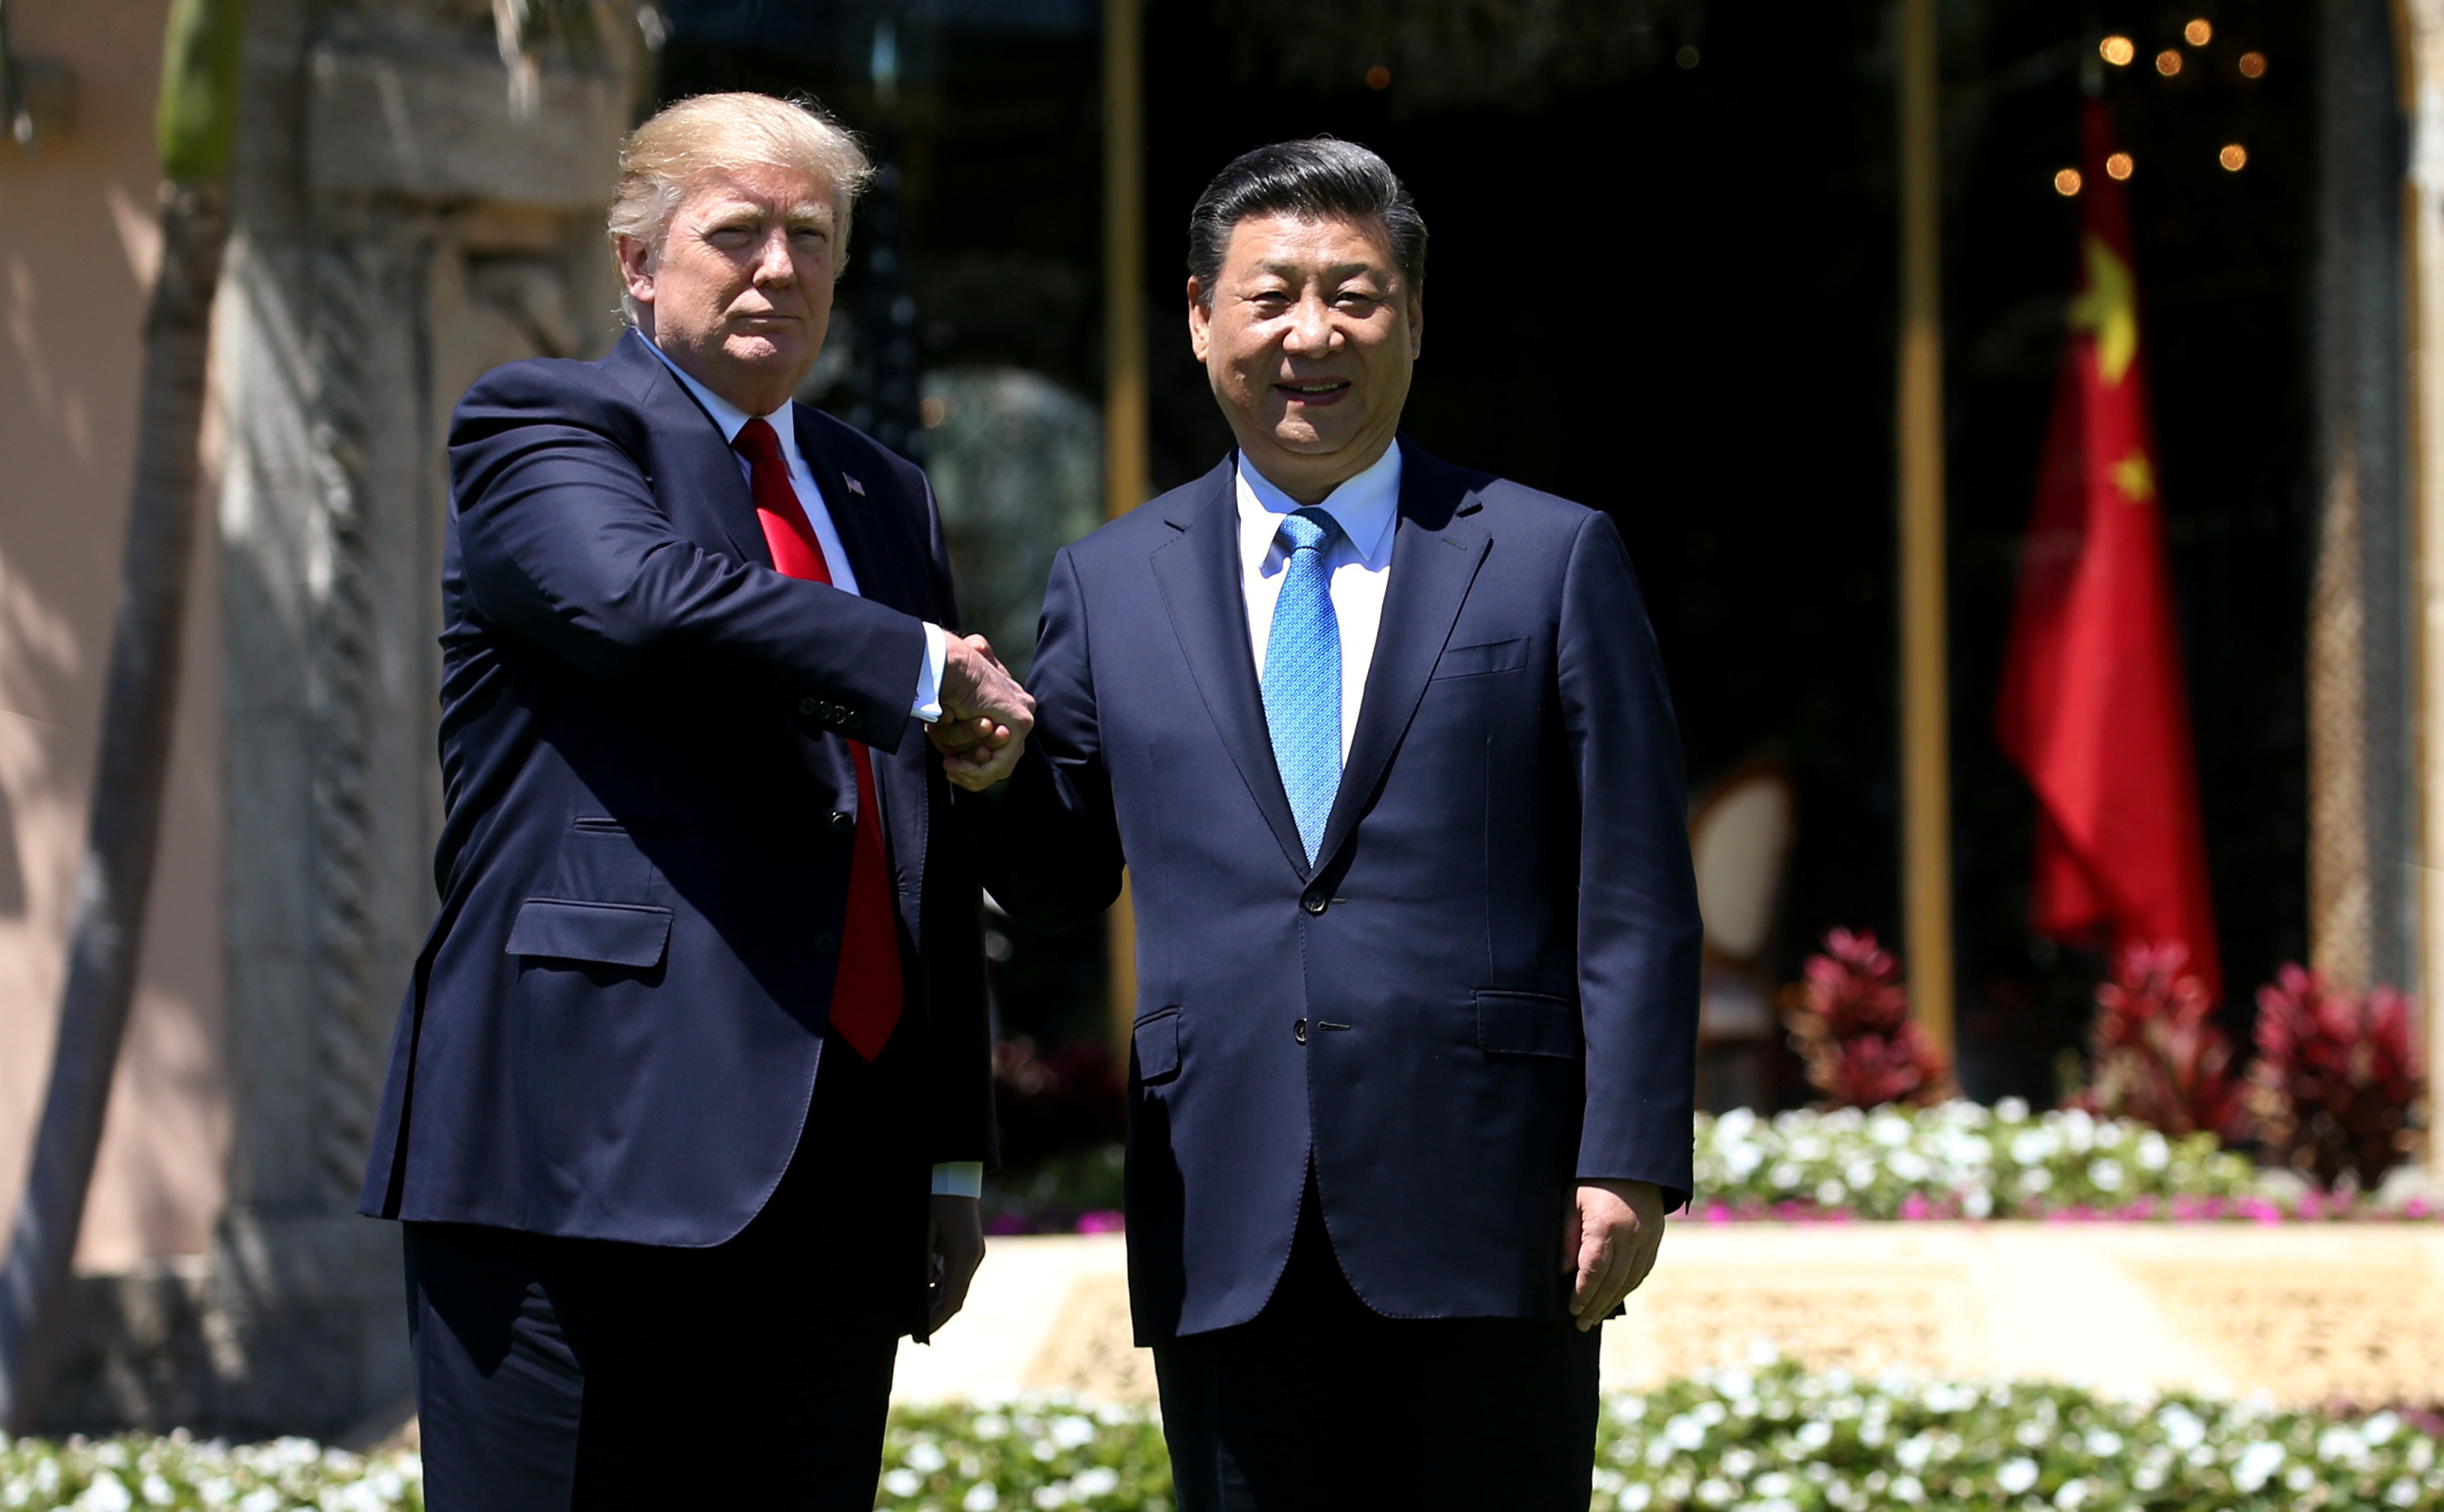 President Trump and Chinese President Xi Jinping.